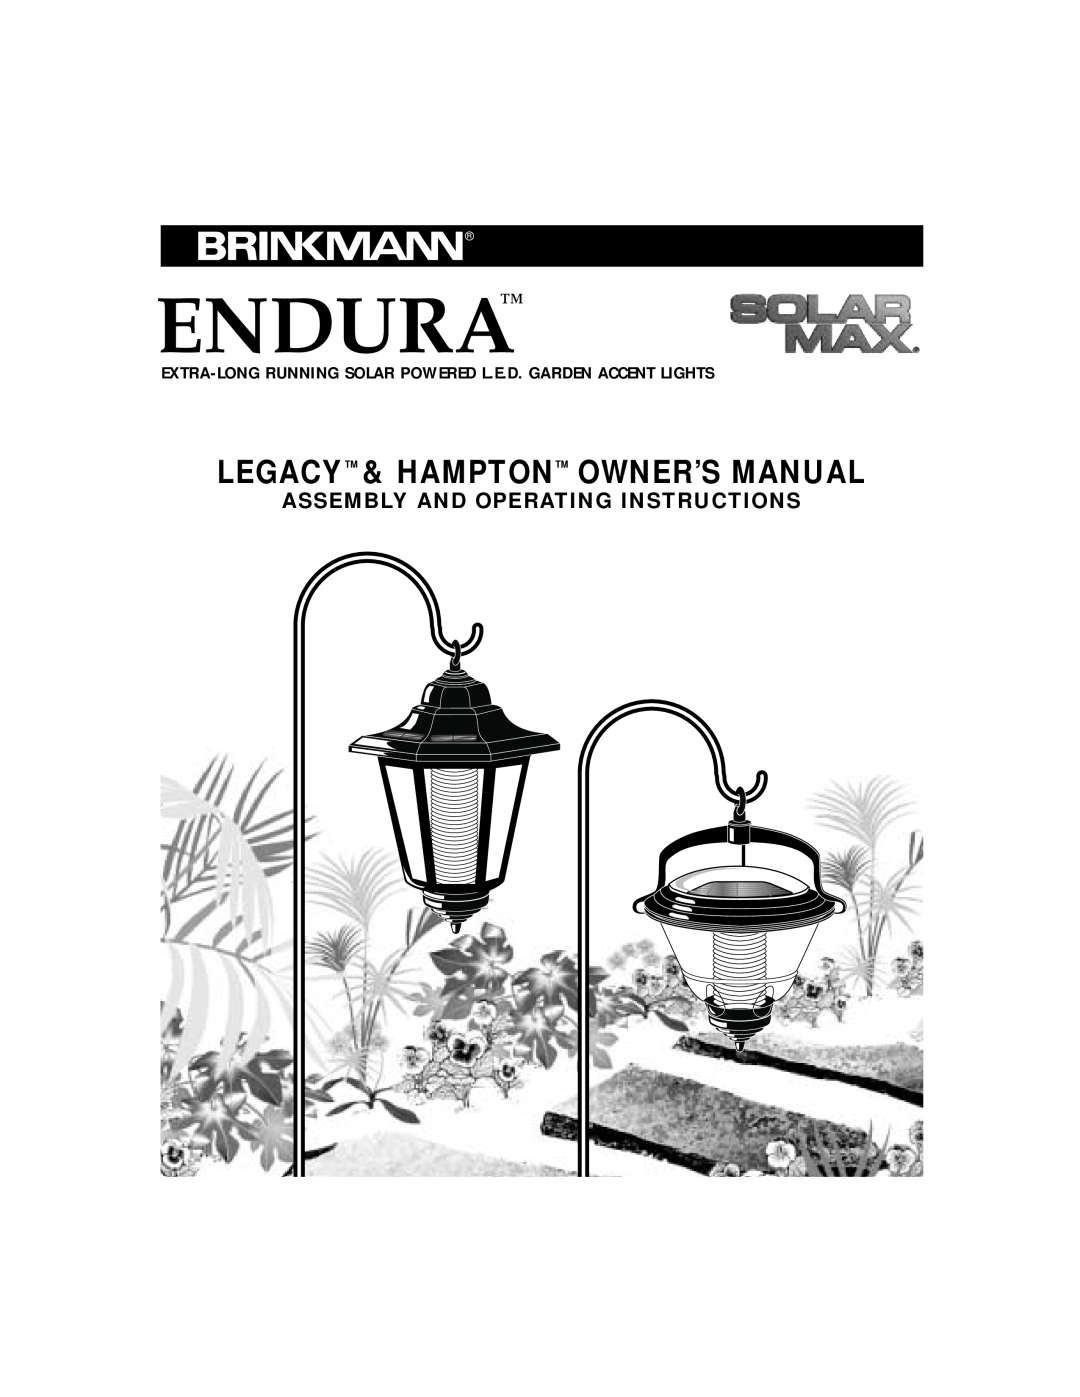 Brinkmann Solar Powered L.E.D. Garden Accent Lights owner manual Endura, Assembly And Operating Instructions 